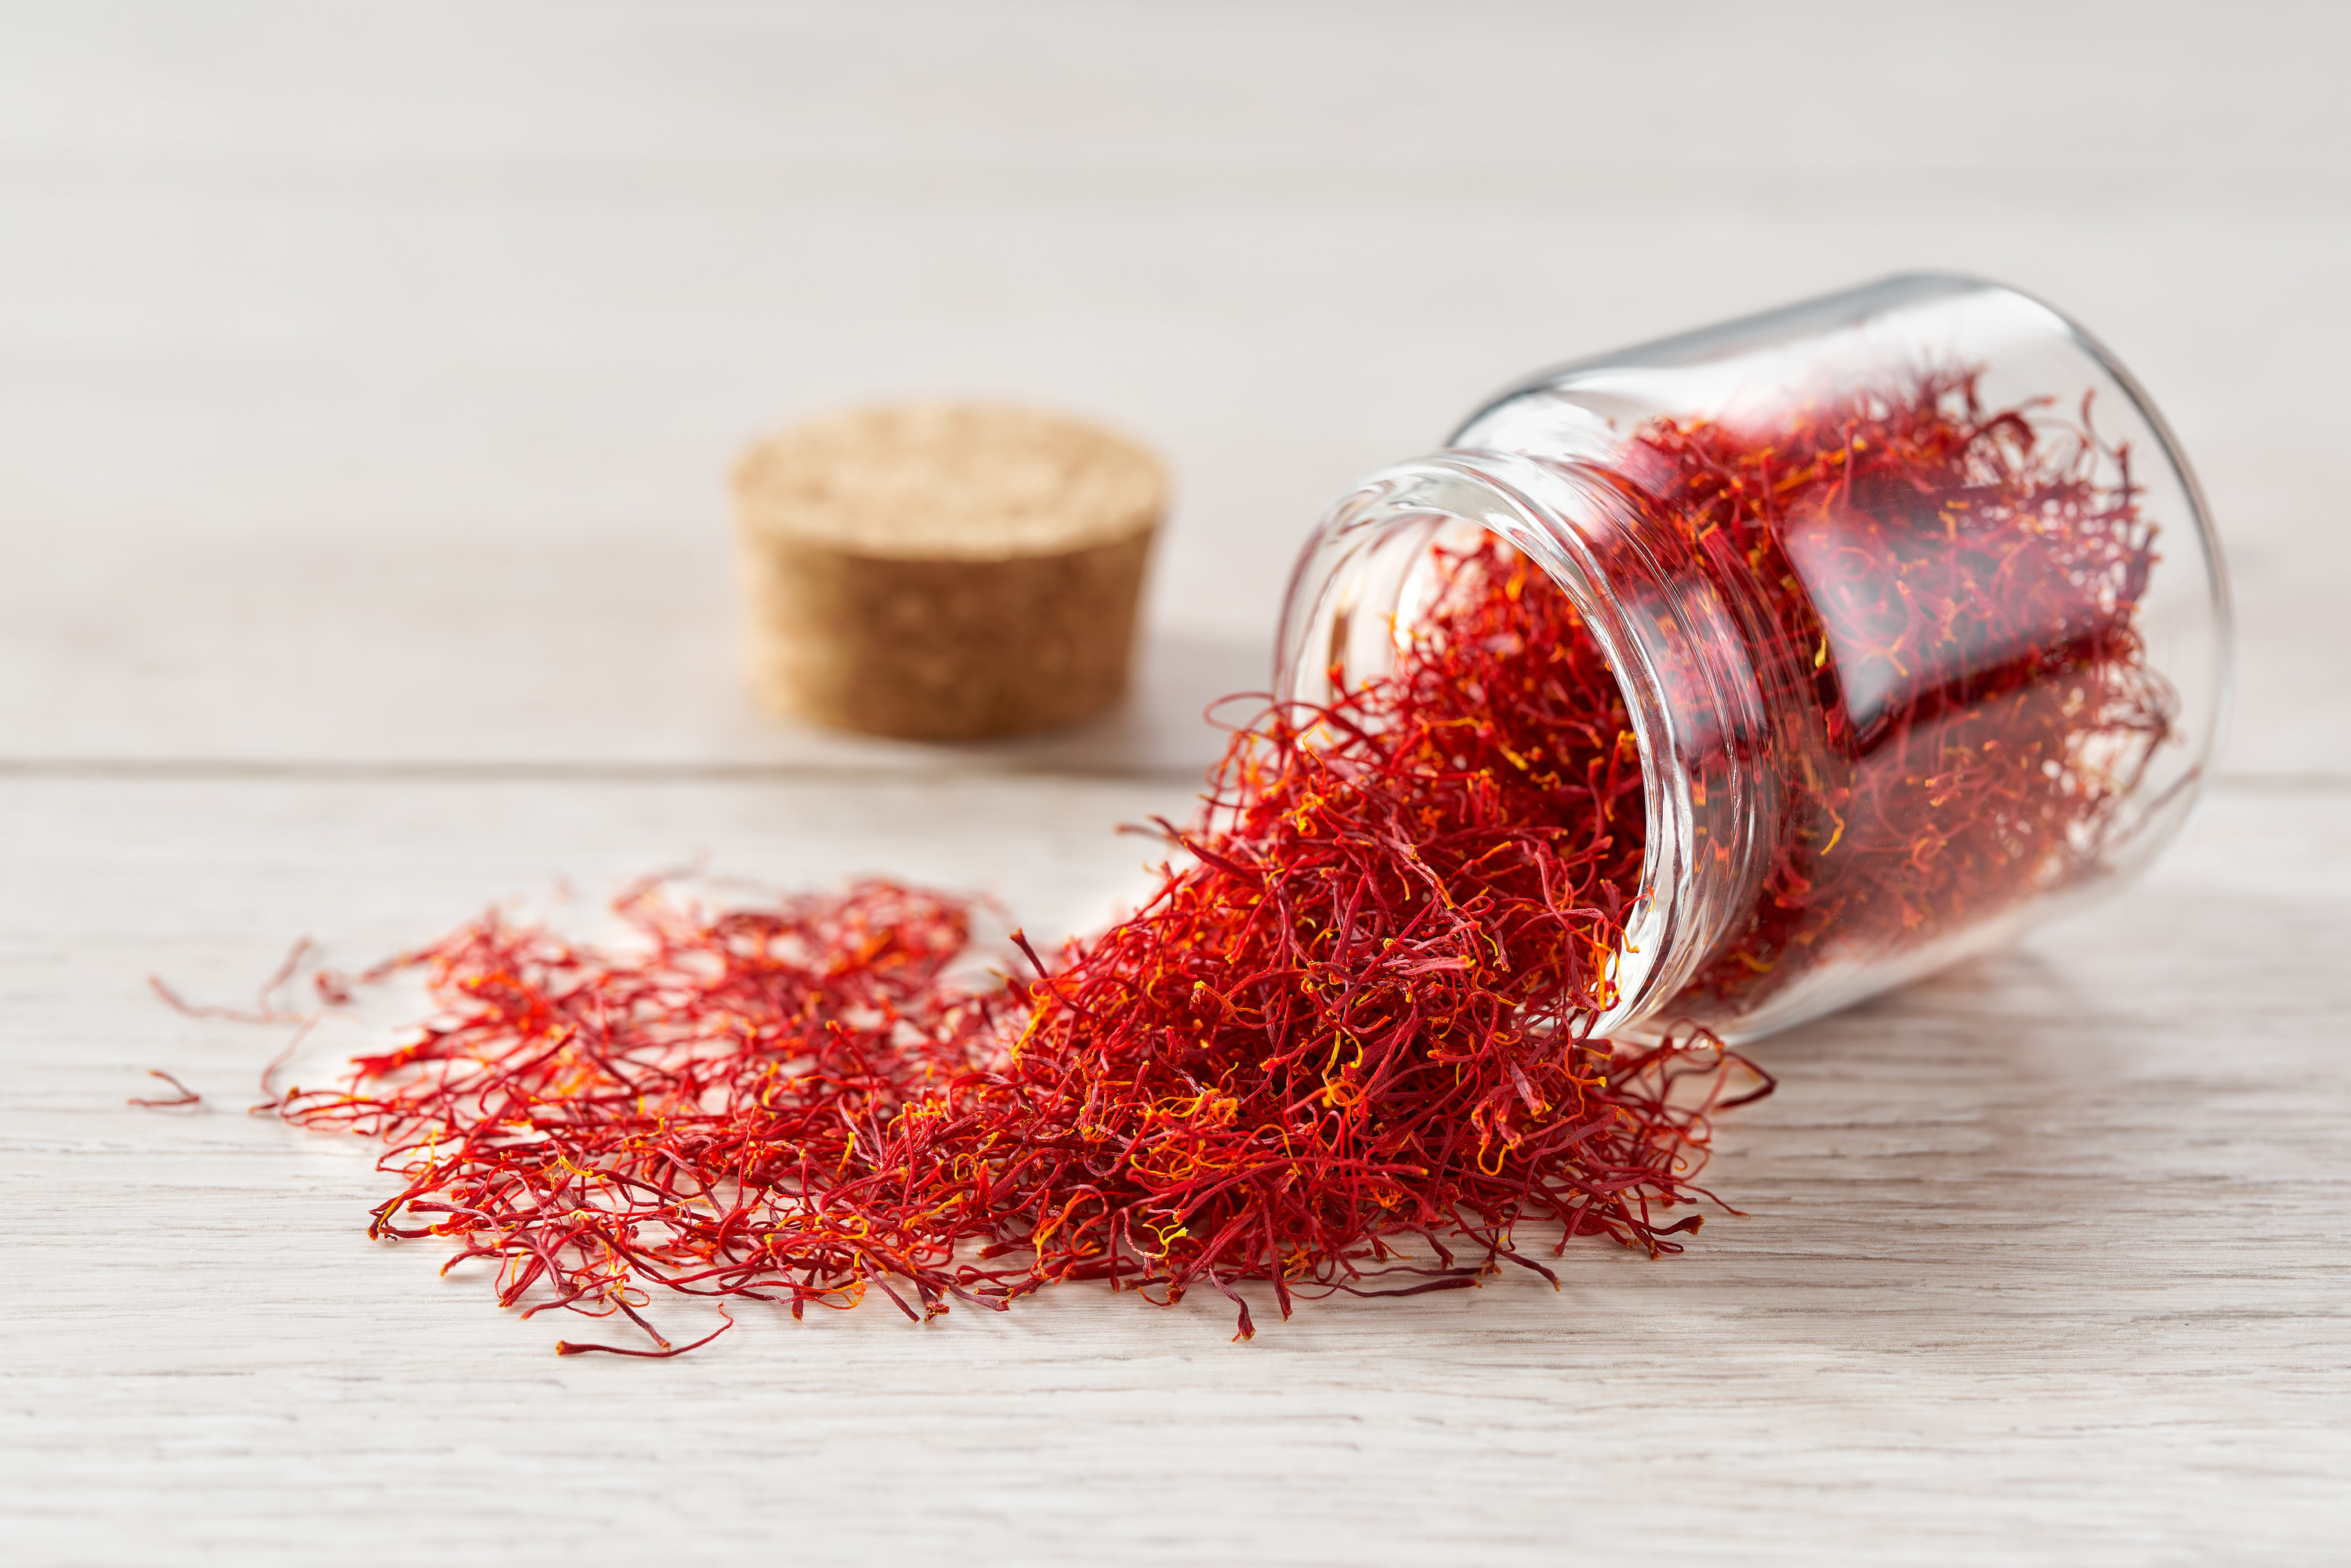 Saffron spill out of a glass storage jar on a wooden table